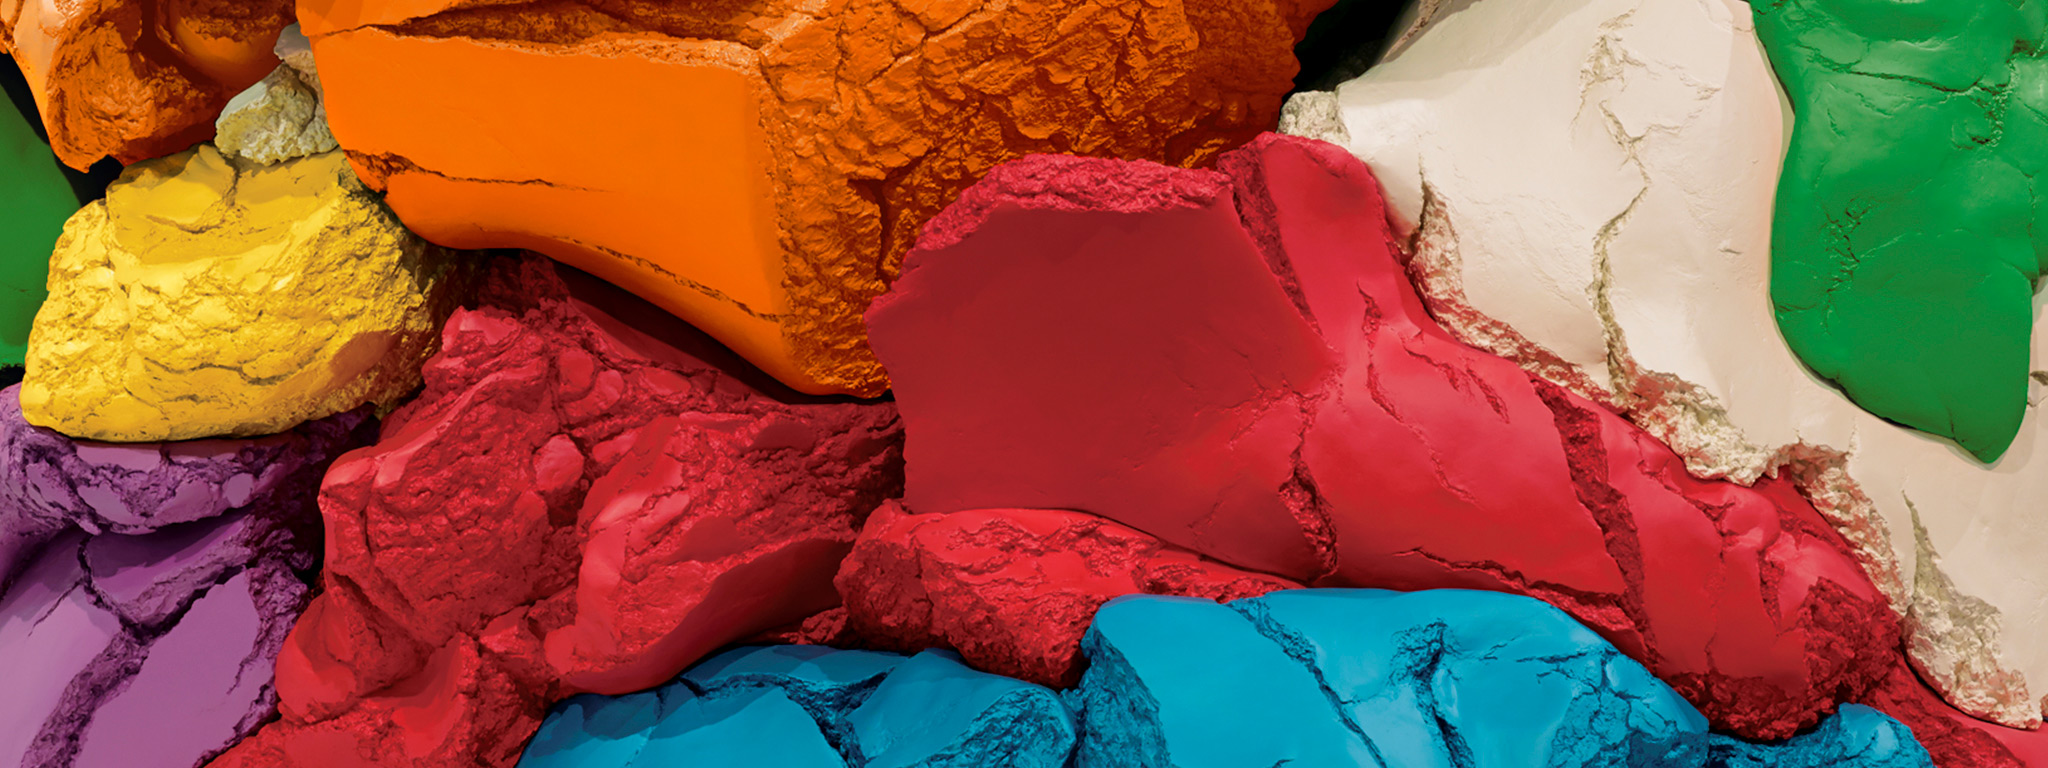 Play-Doh (detail), 1994–2014, Jeff Koons; polychromed aluminum. Collection of the artist. © Jeff Koons. Photo: Tom Powel Imaging